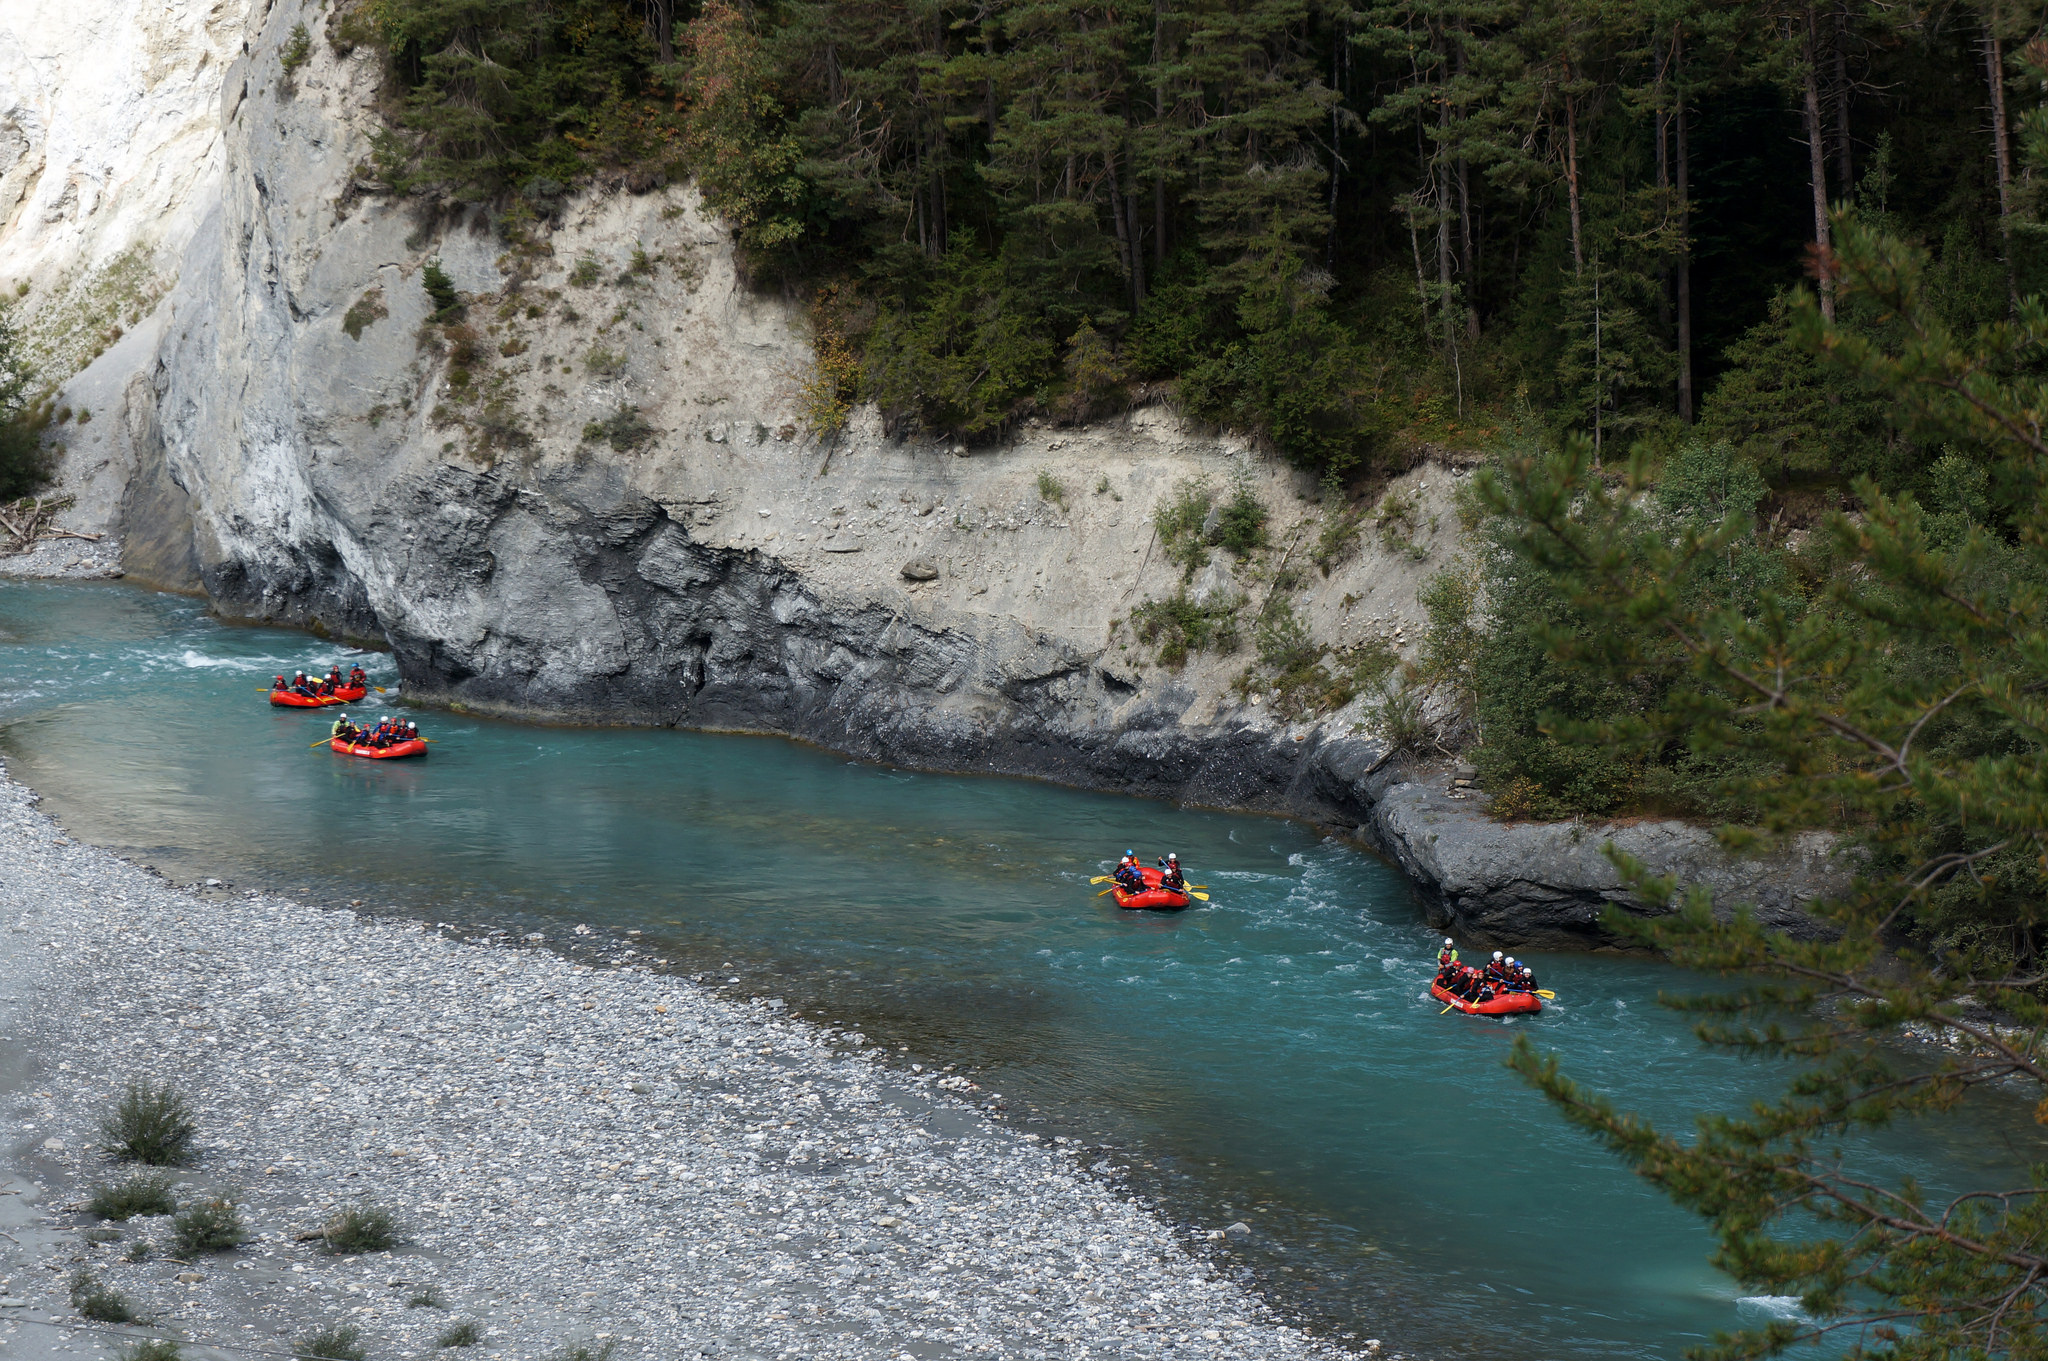 Where to find the best whitewater rafting in Europe | Rhine River - Switzerland